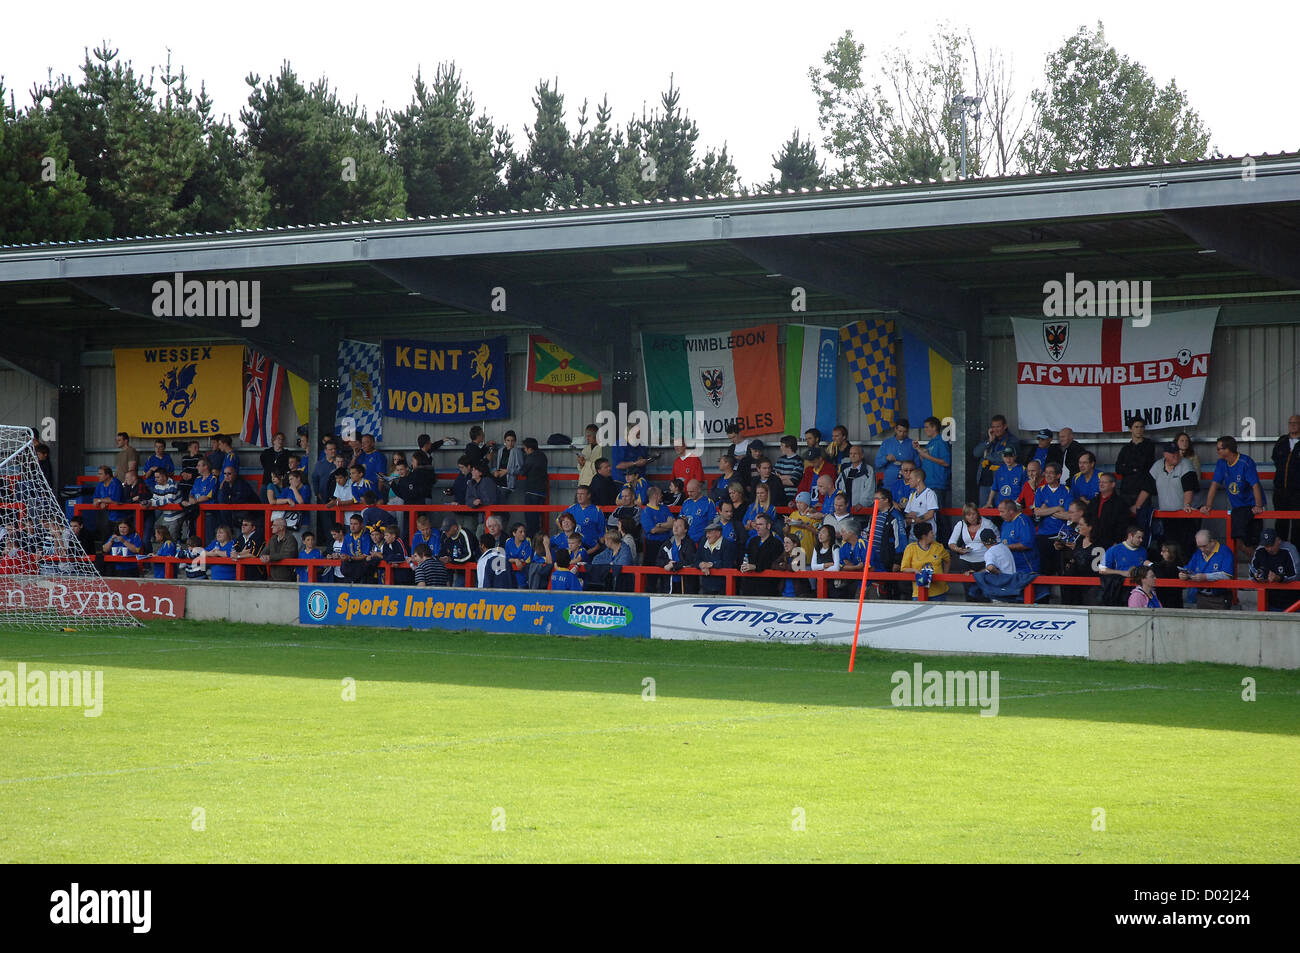 Kingston upon Thames, England. AFC Wimbledon supporters at their current Kingsmeadow stadium. Stock Photo